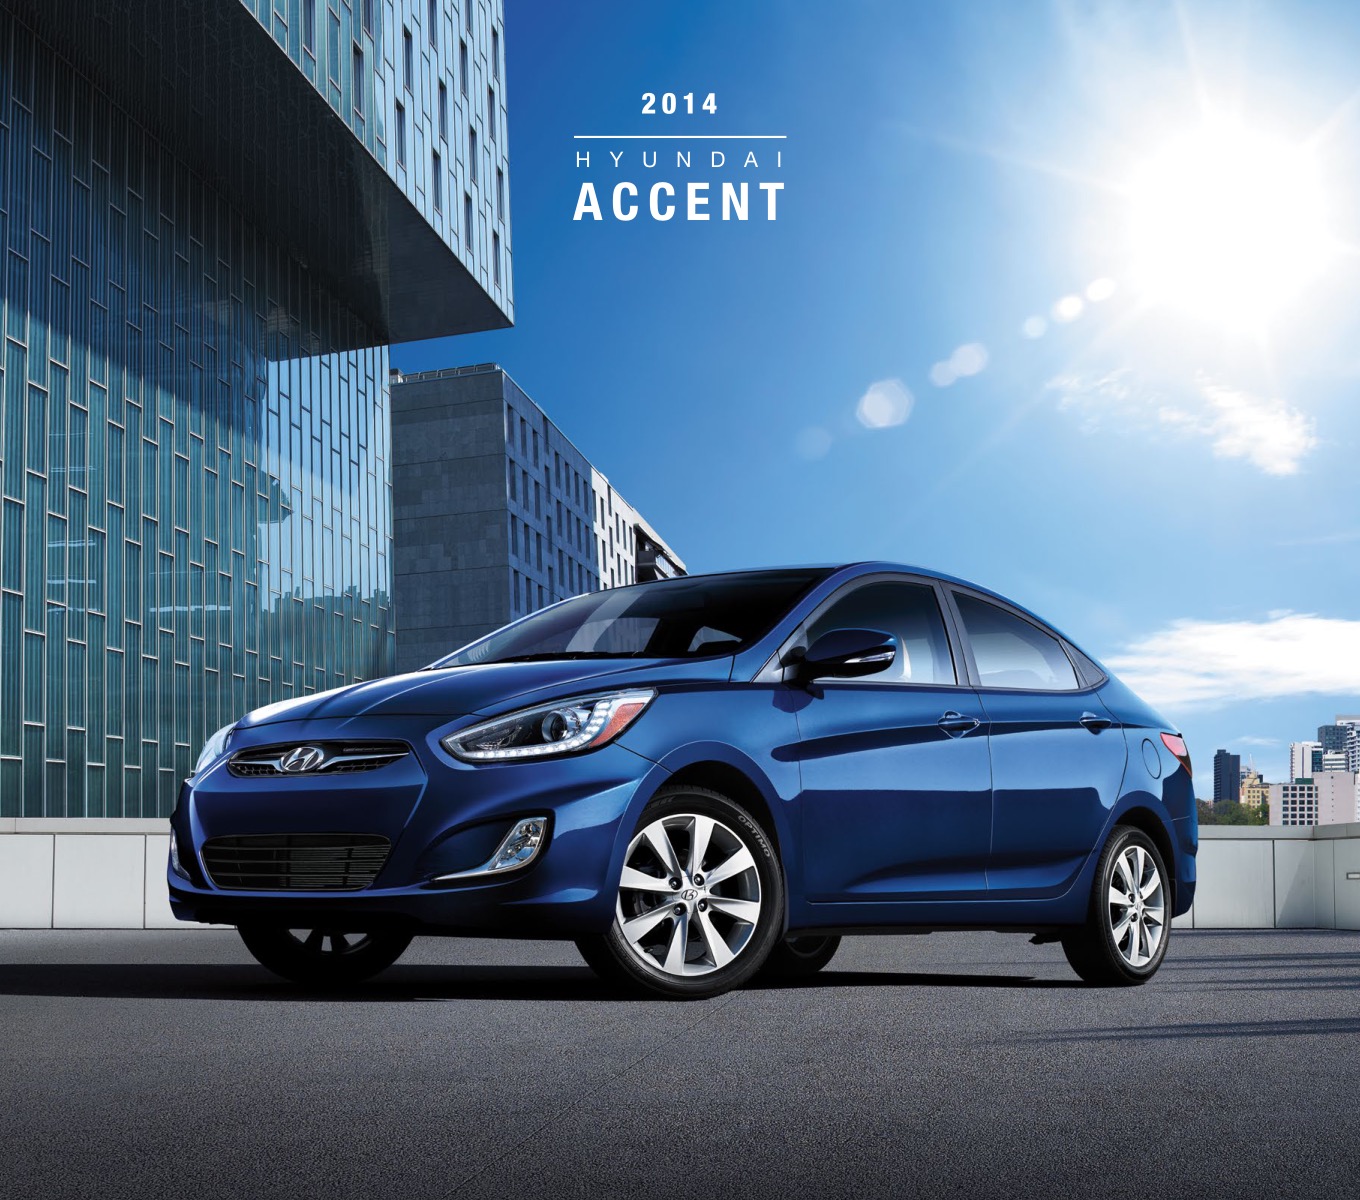 2014 Hyundai Accent Brochure Page 5